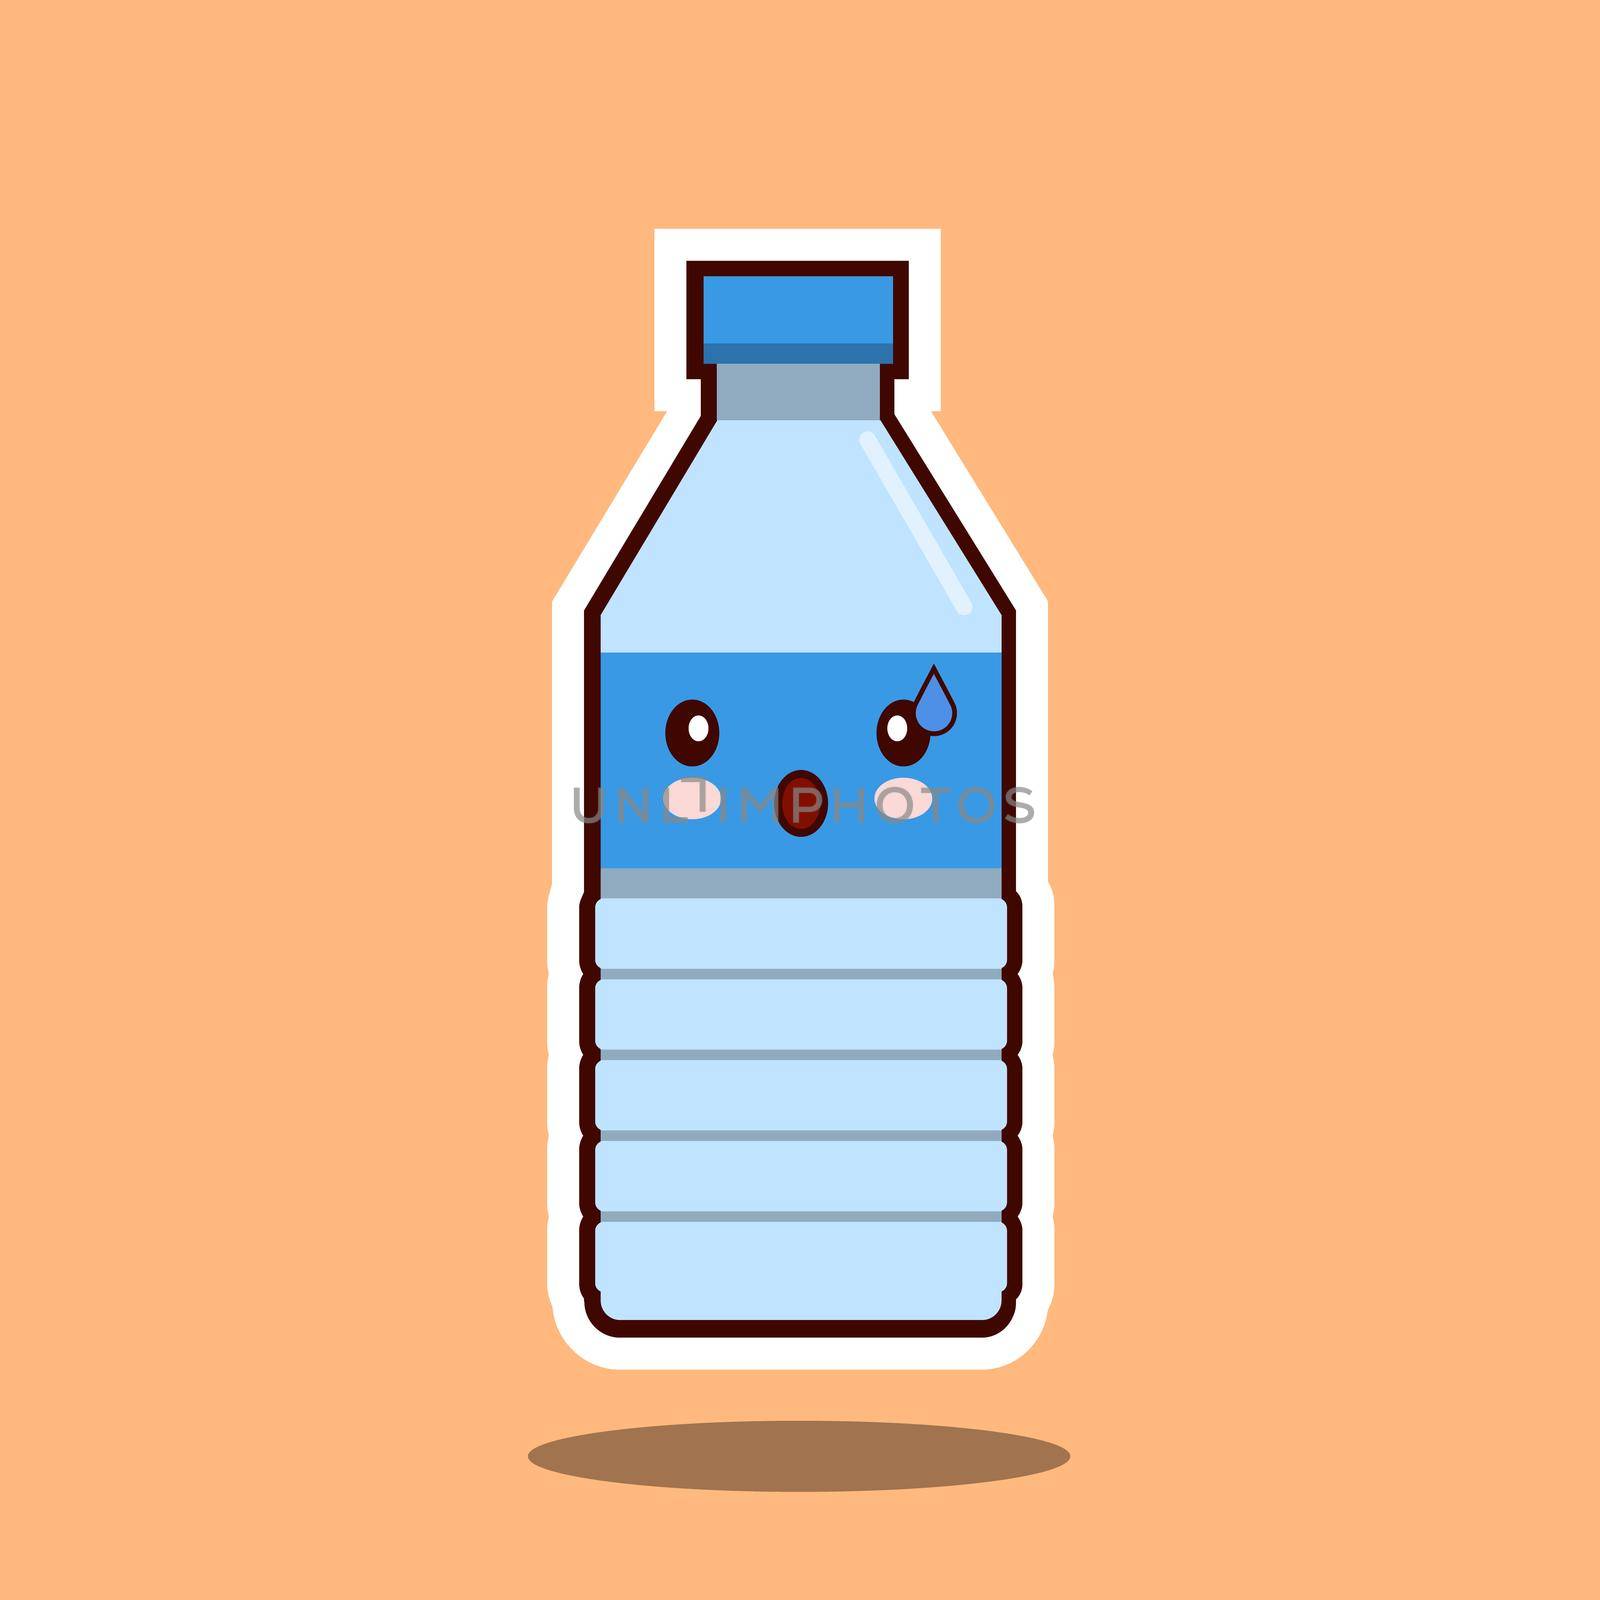 Water Plastic Bottle kawawii Sign. Illustration Isolated On by Alxyzt